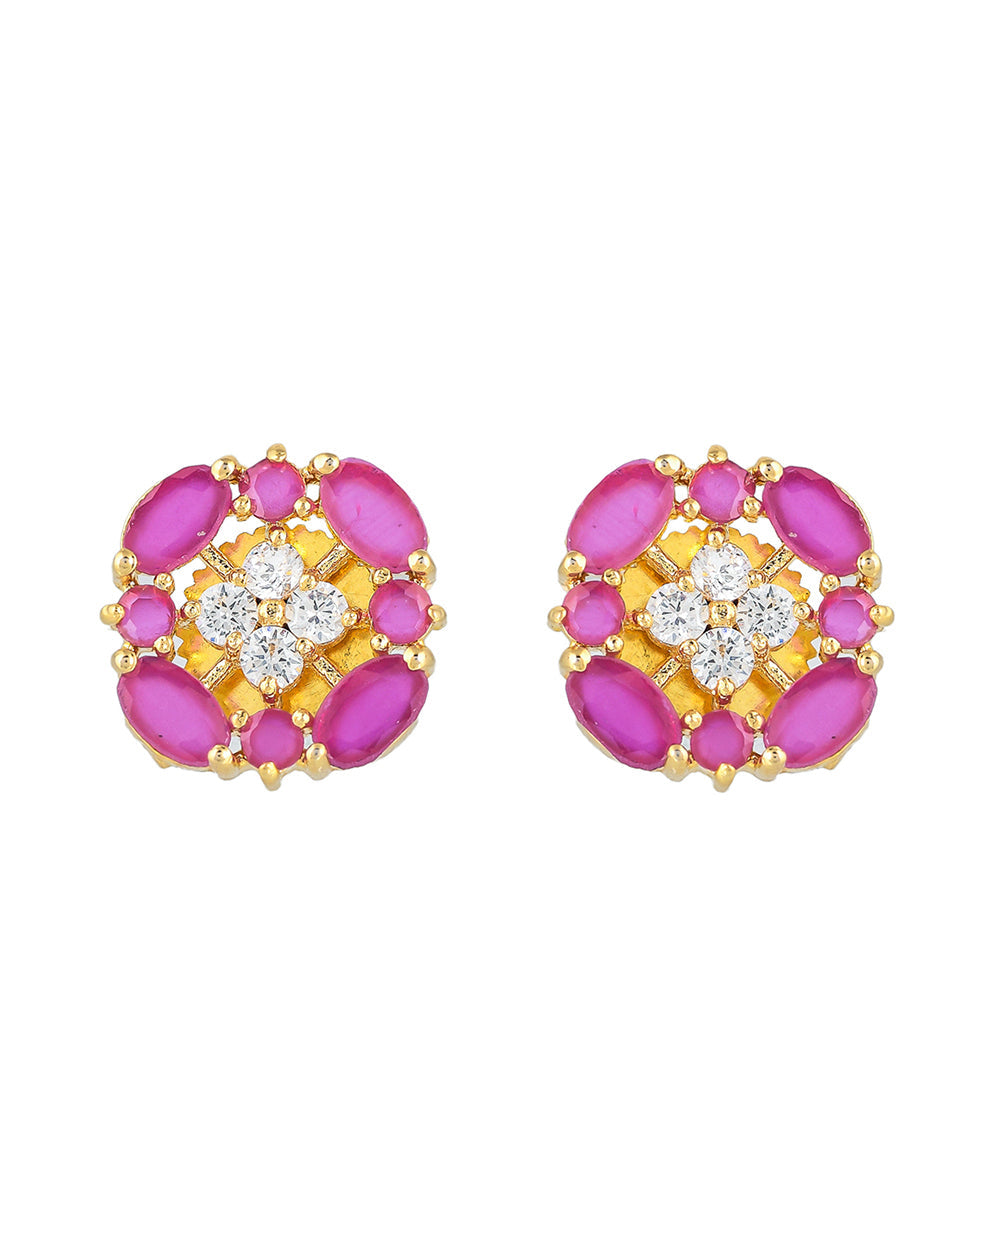 Women's Tiny White And Pink Cz Stud Earrings - Voylla